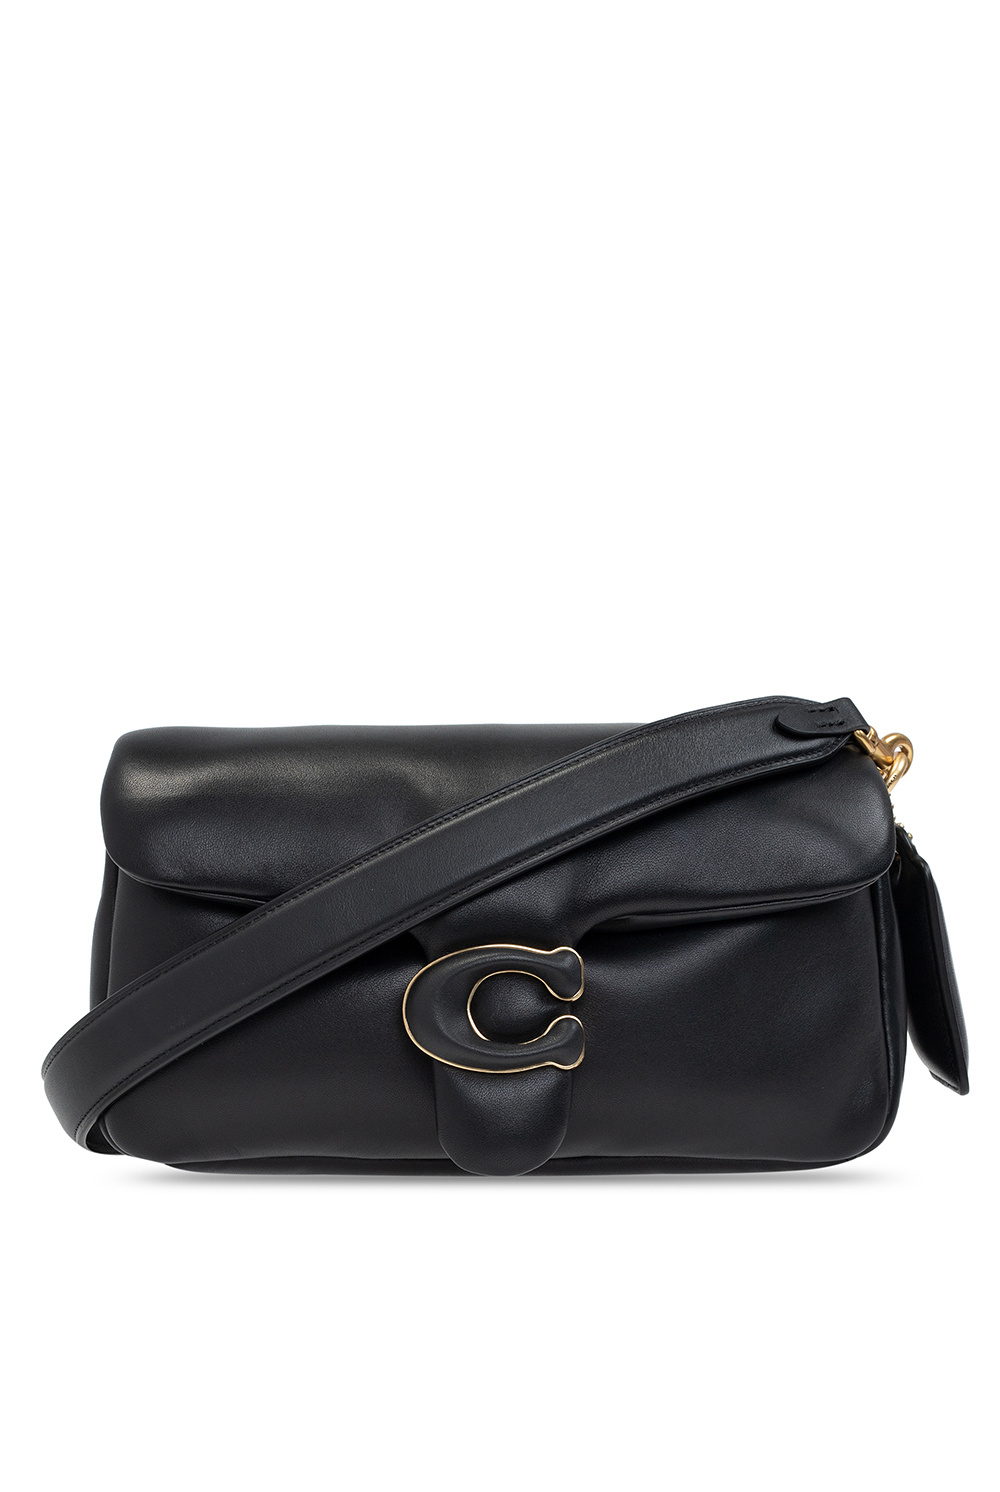 Coach Pillow Tabby Bag Black - $295 - From Cely